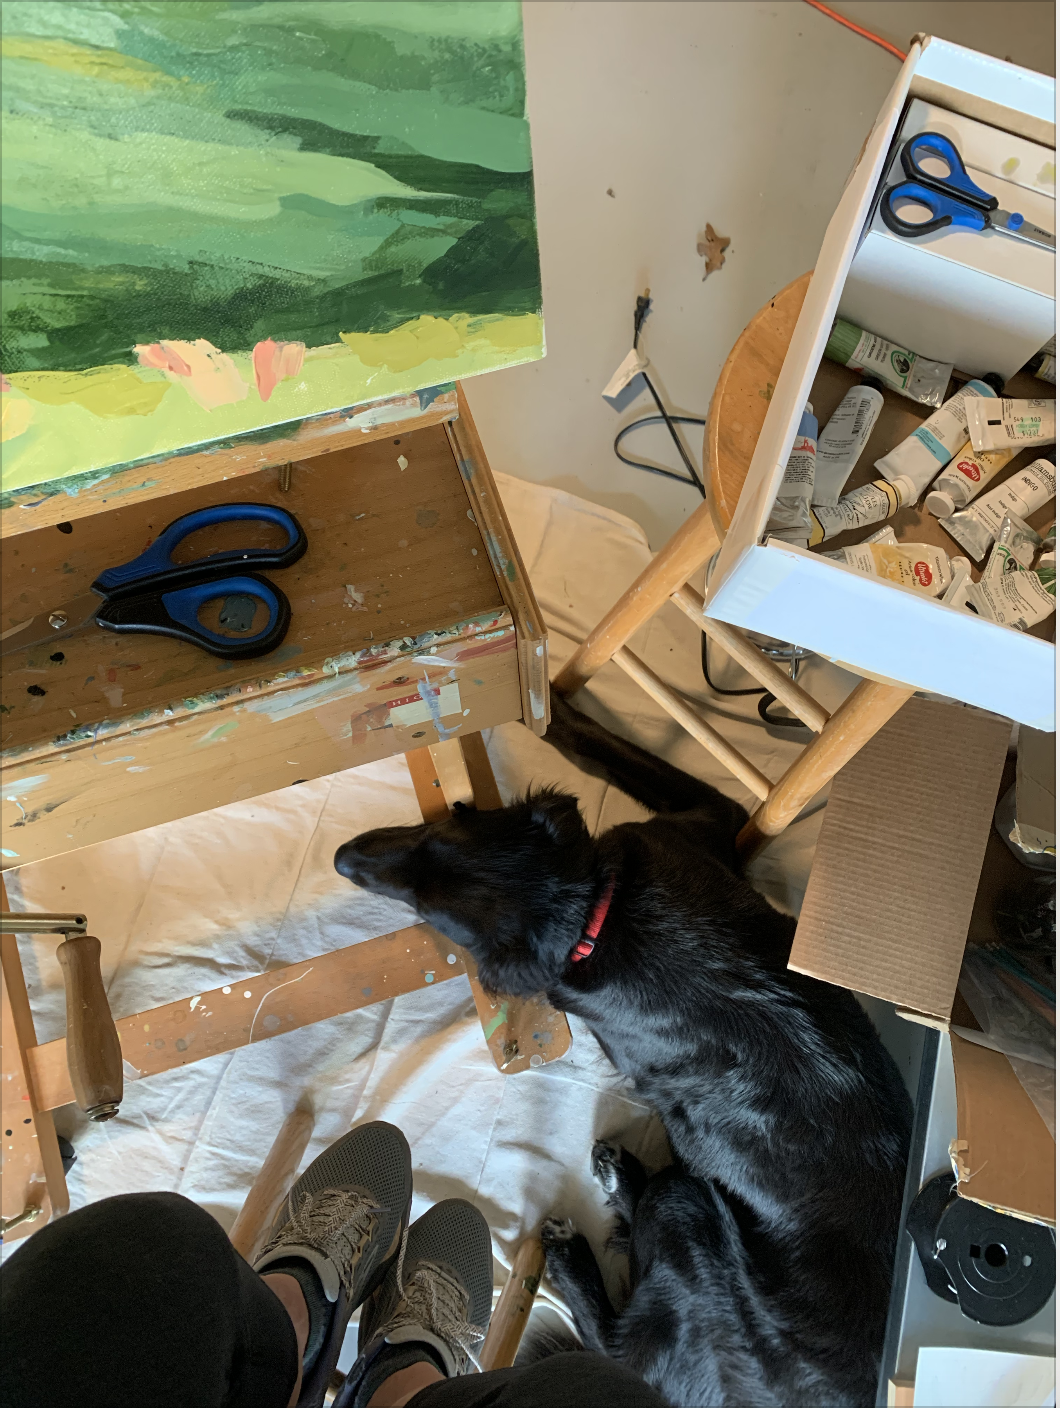 My studio buddy helping me with a commission